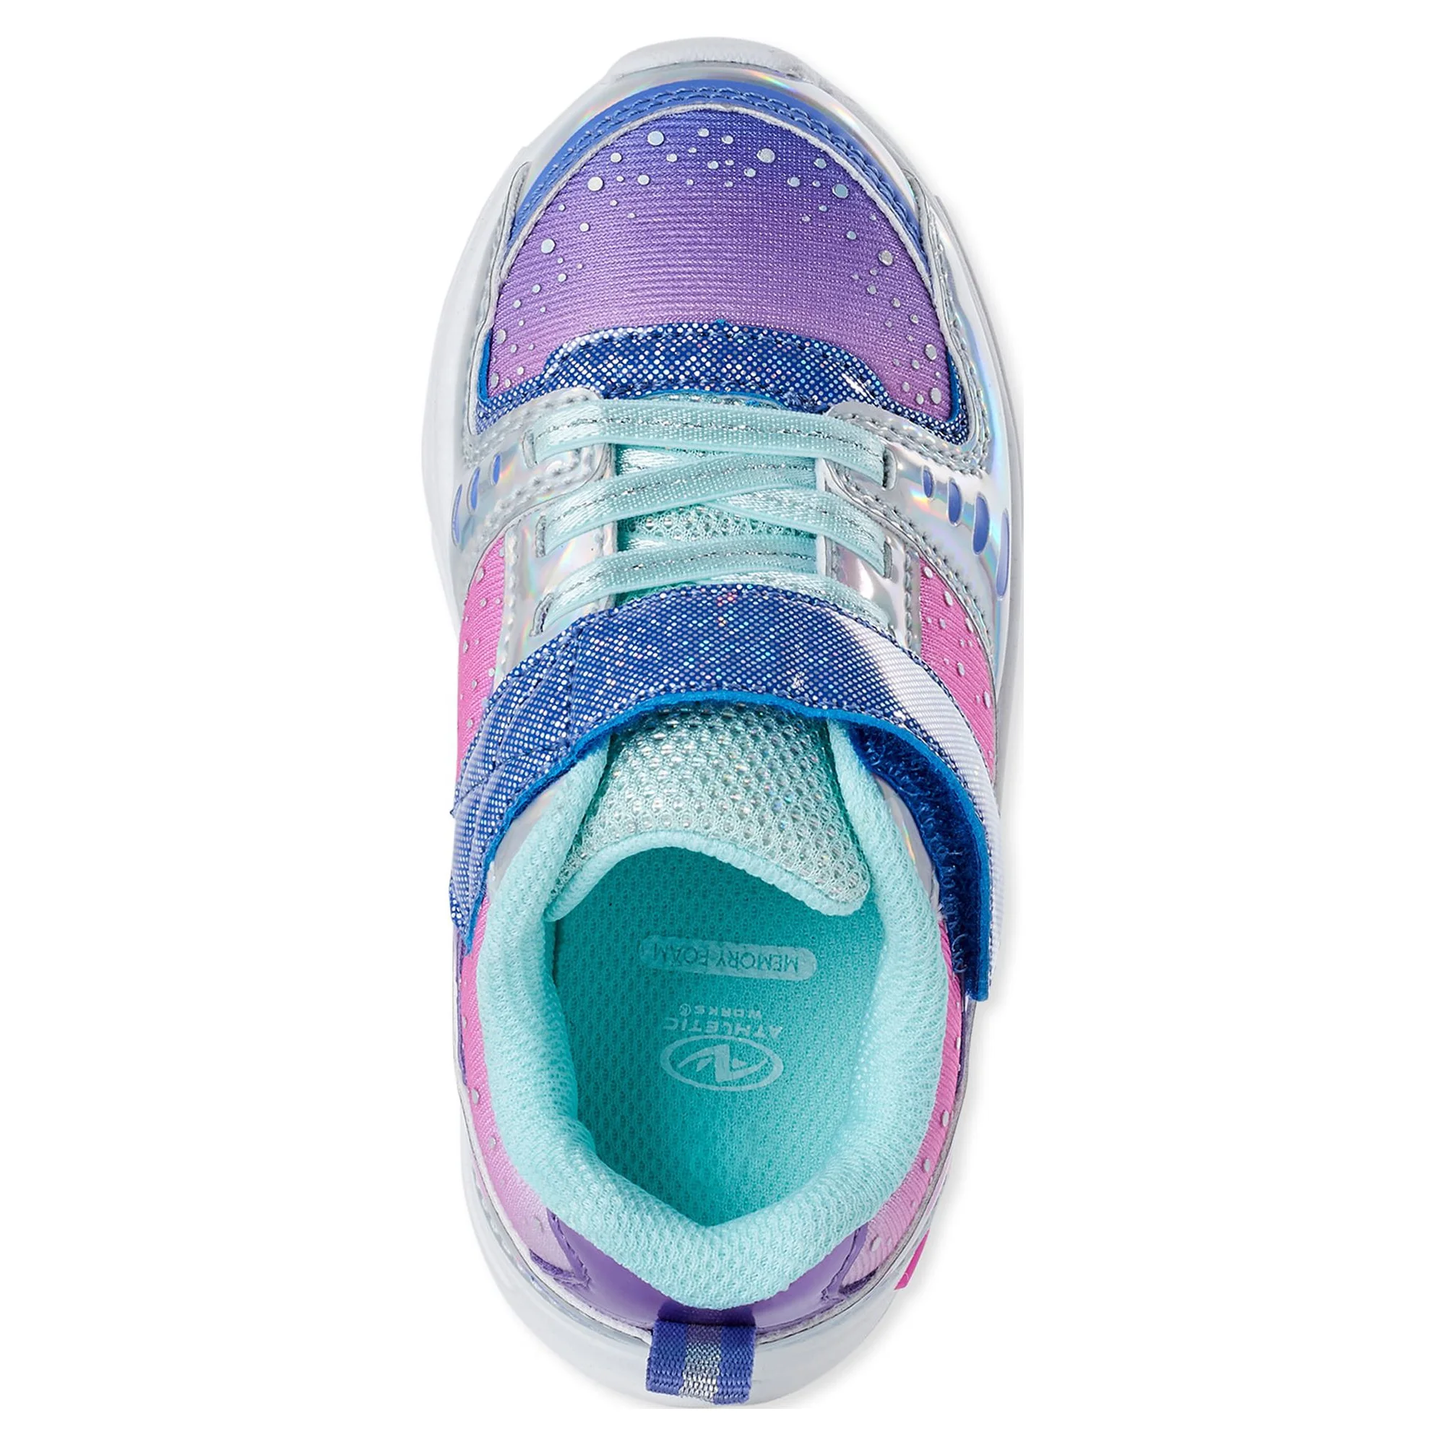 Toddler Girls Low Top Light Up Sneakers